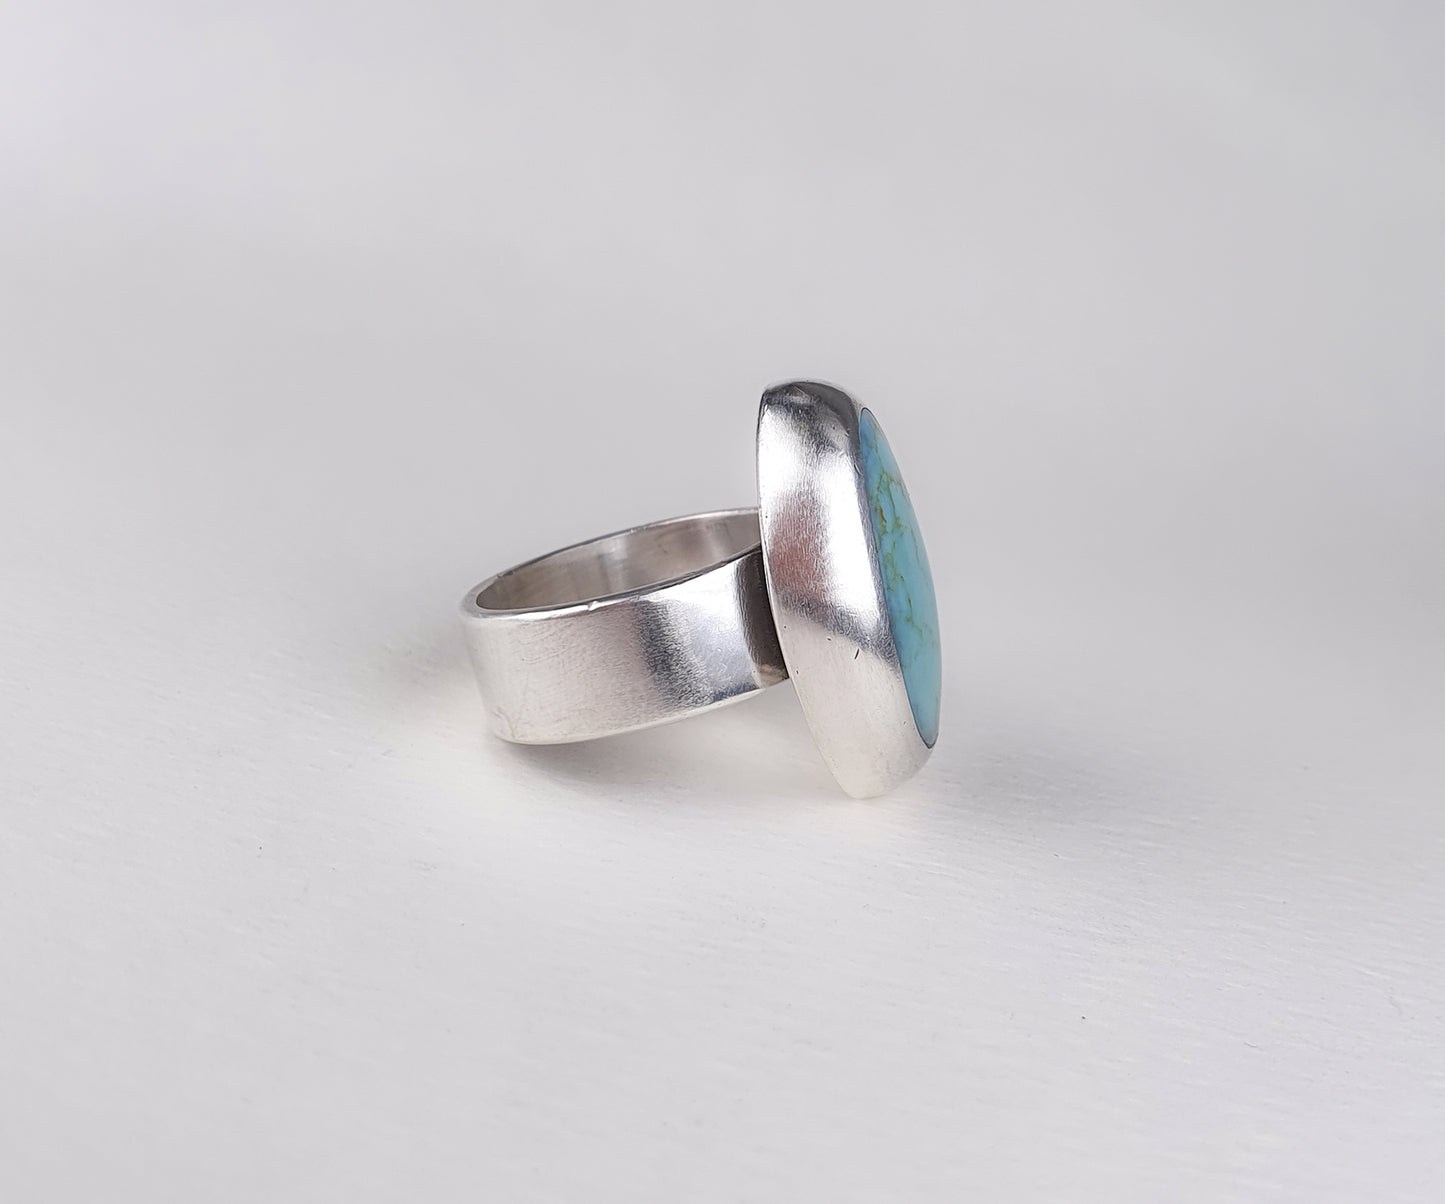 Vintage Mexican Turquoise Ring in Silver